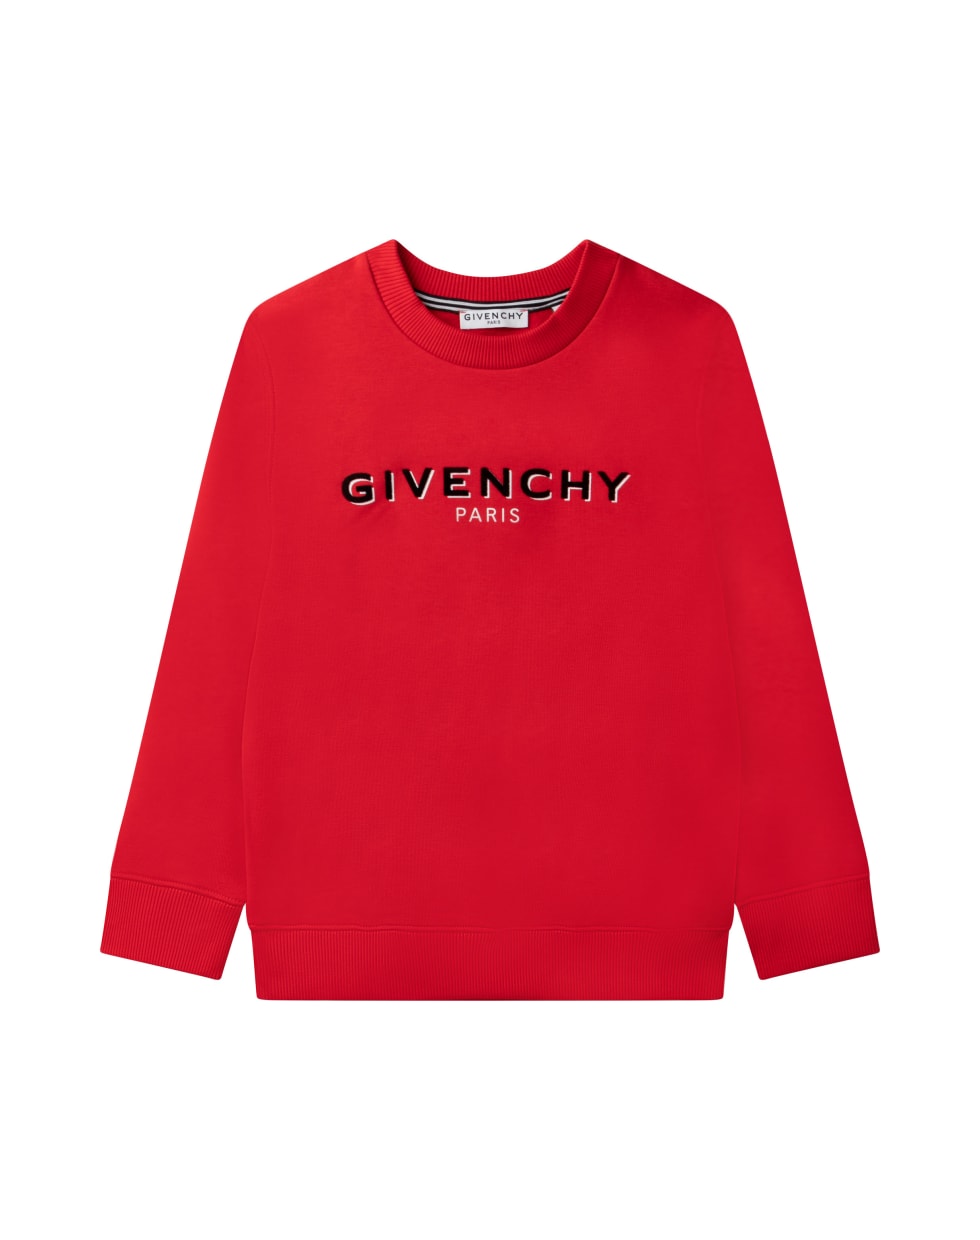 Givenchy Sweatshirt With Print - Rosso Vivo